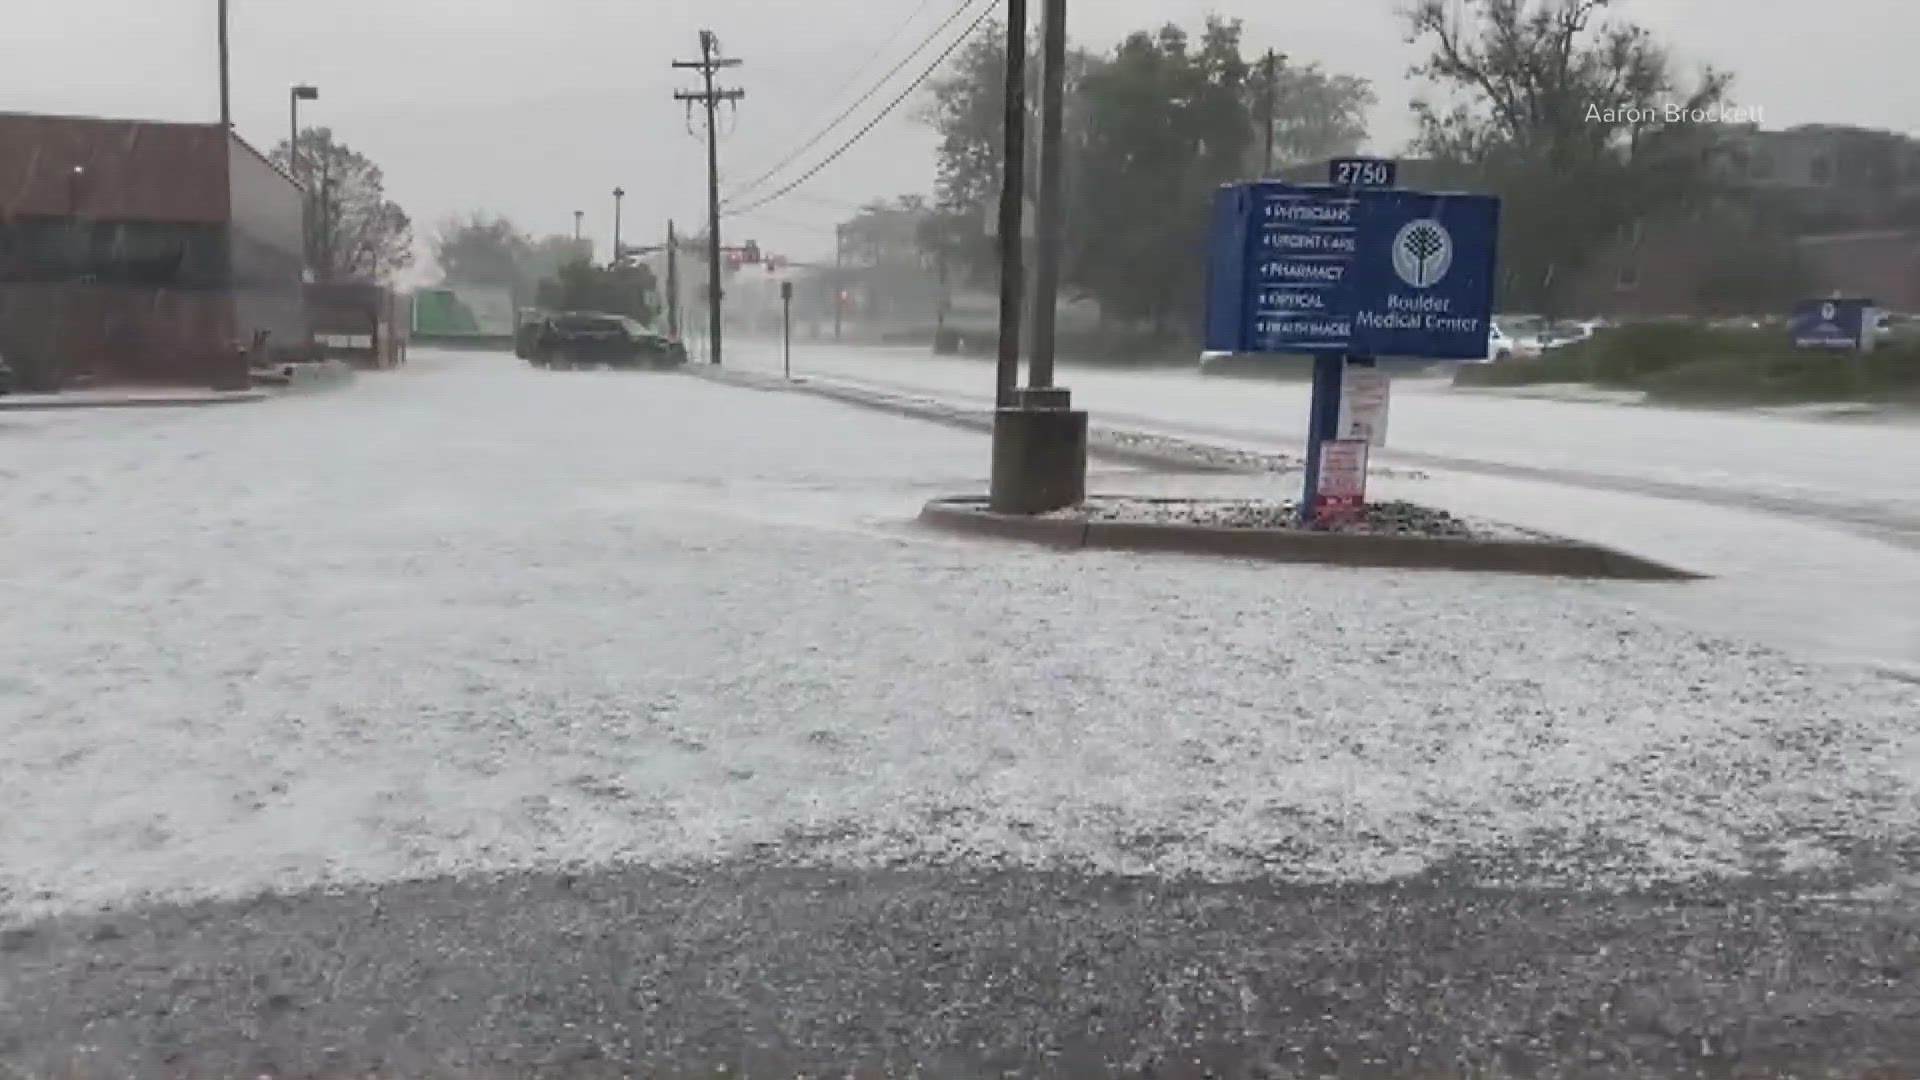 Rain, hail and street flooding hit parts of the Denver metro area and Boulder.